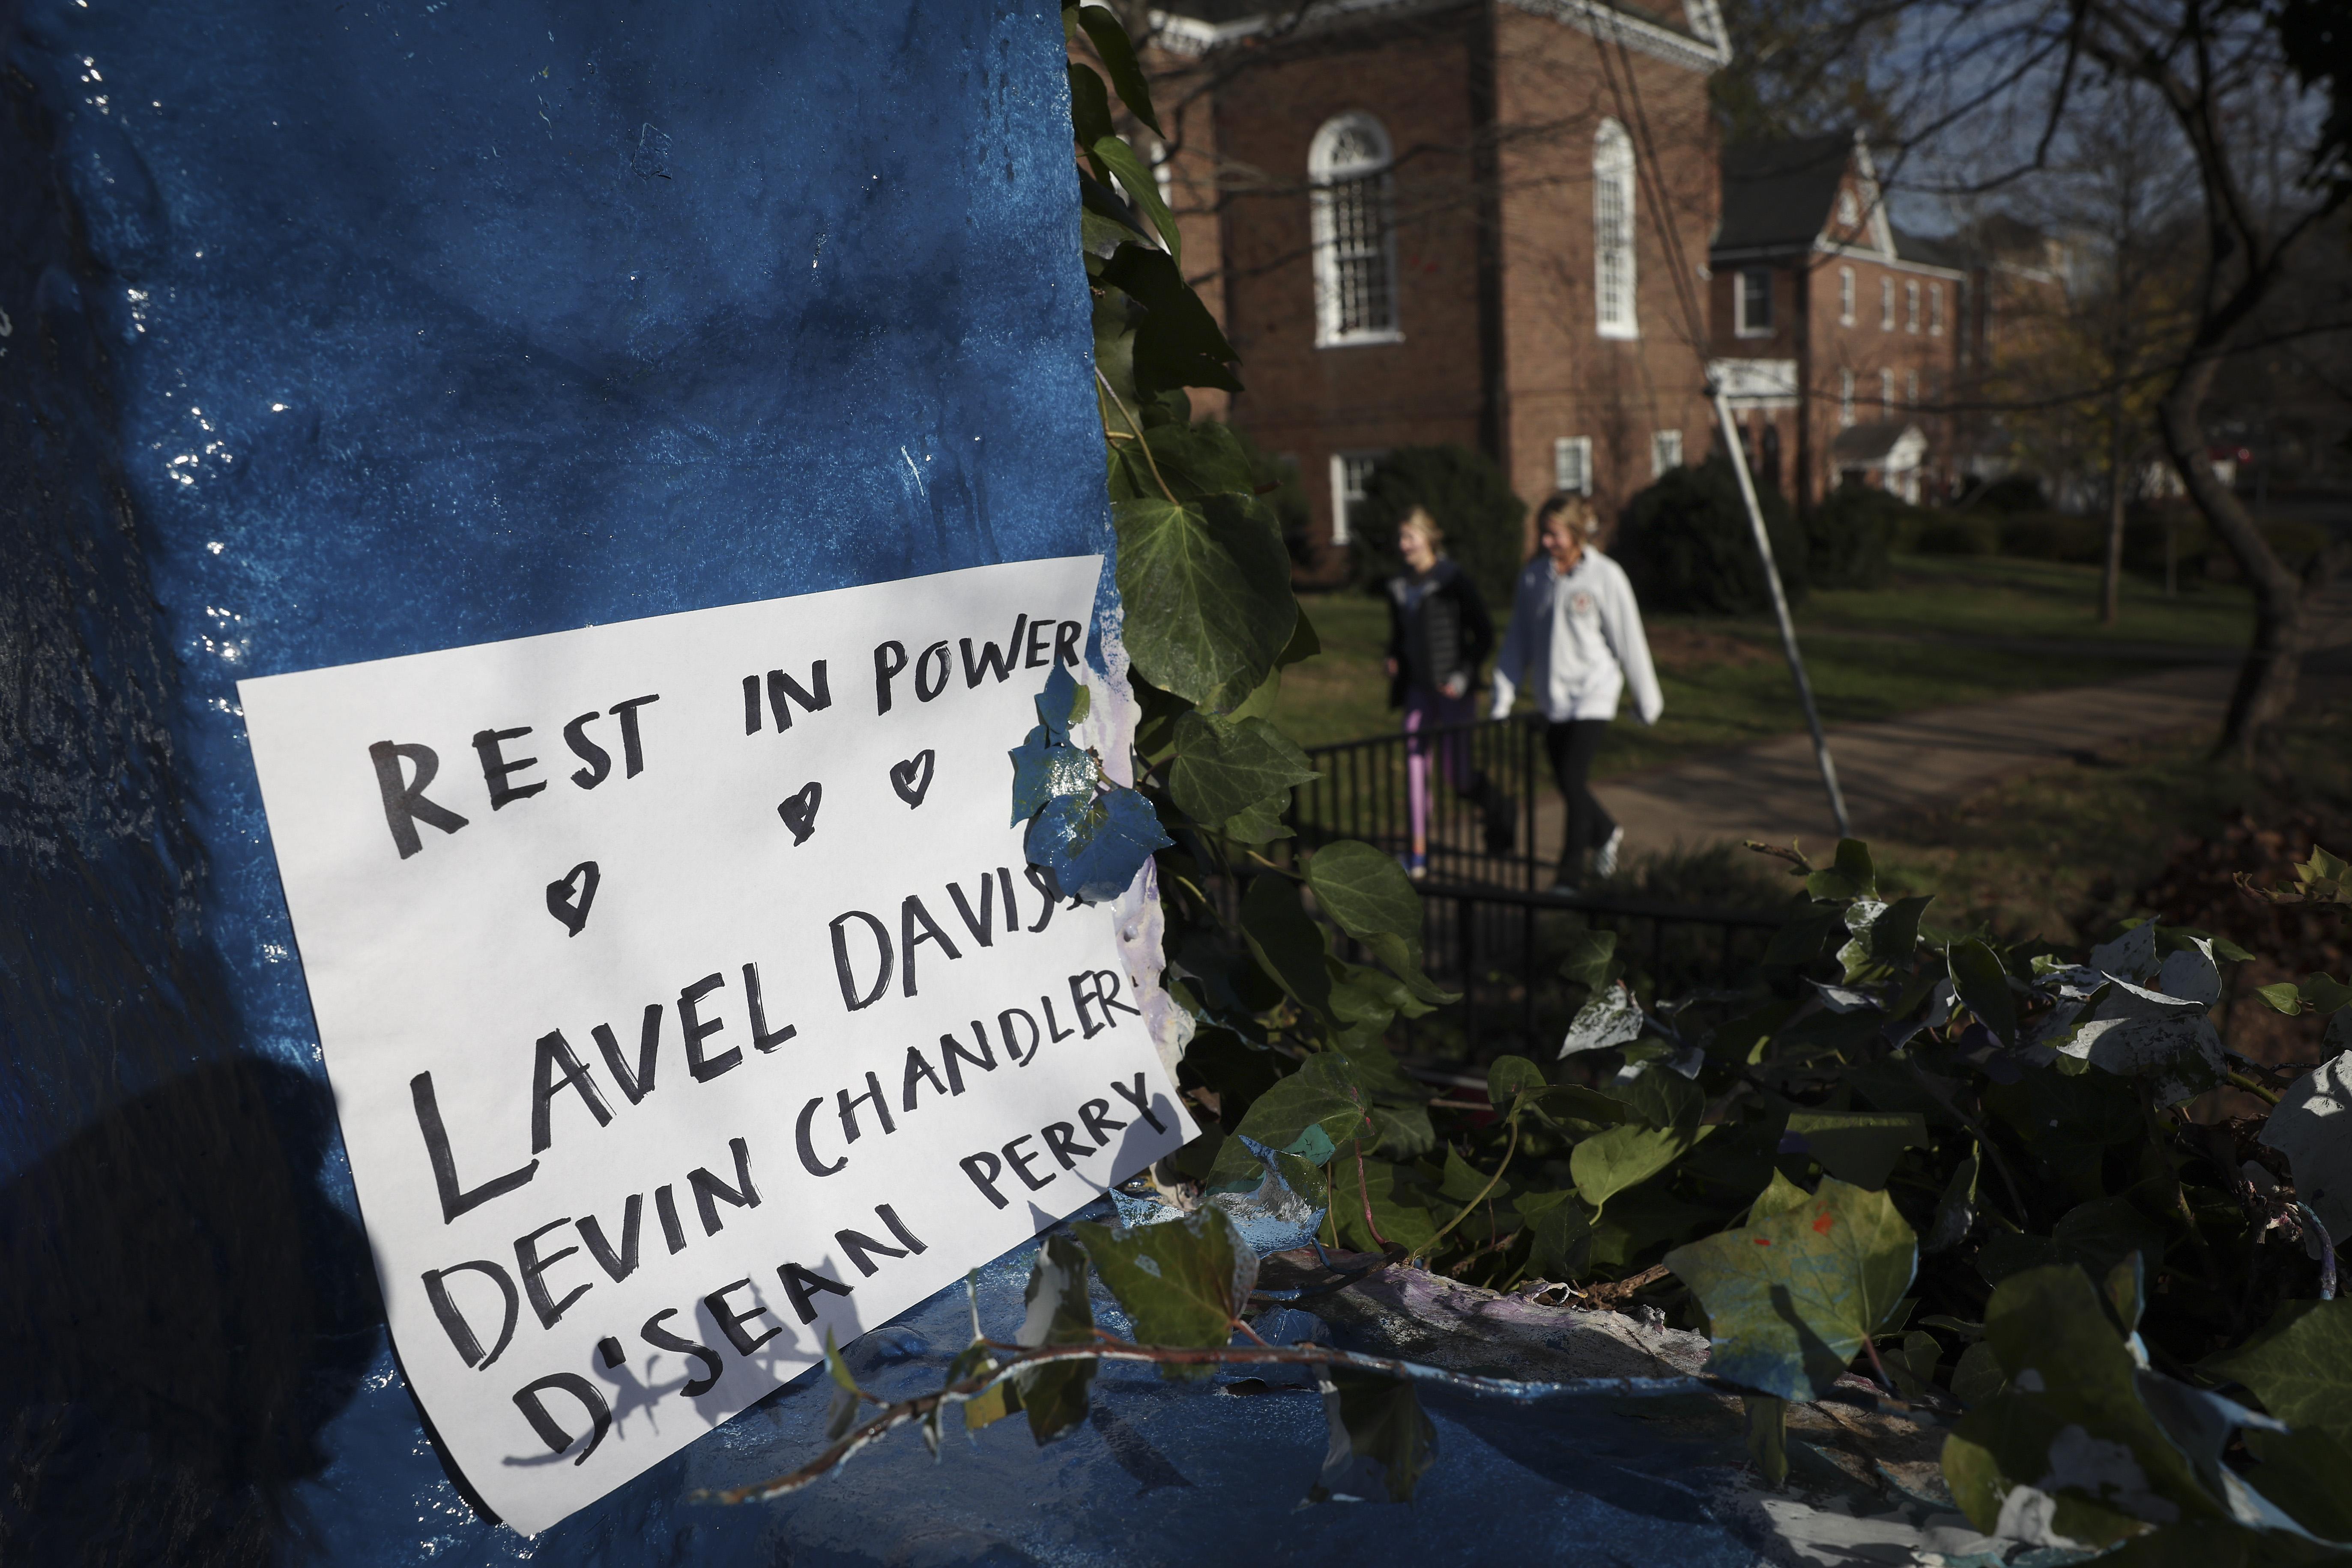 CHARLOTTESVILLE, VIRGINIA - NOVEMBER 14: Students walk past a sign memorializing three University of Virginia football players killed during an overnight shooting at the university on November 14, 2022 in Charlottesville, Virginia. The suspect, Christopher Jones, was apprehended this morning following the shooting where 3 people were killed and 2 others were wounded on the grounds of the University of Virginia yesterday evening. (Photo by Win McNamee/Getty Images)